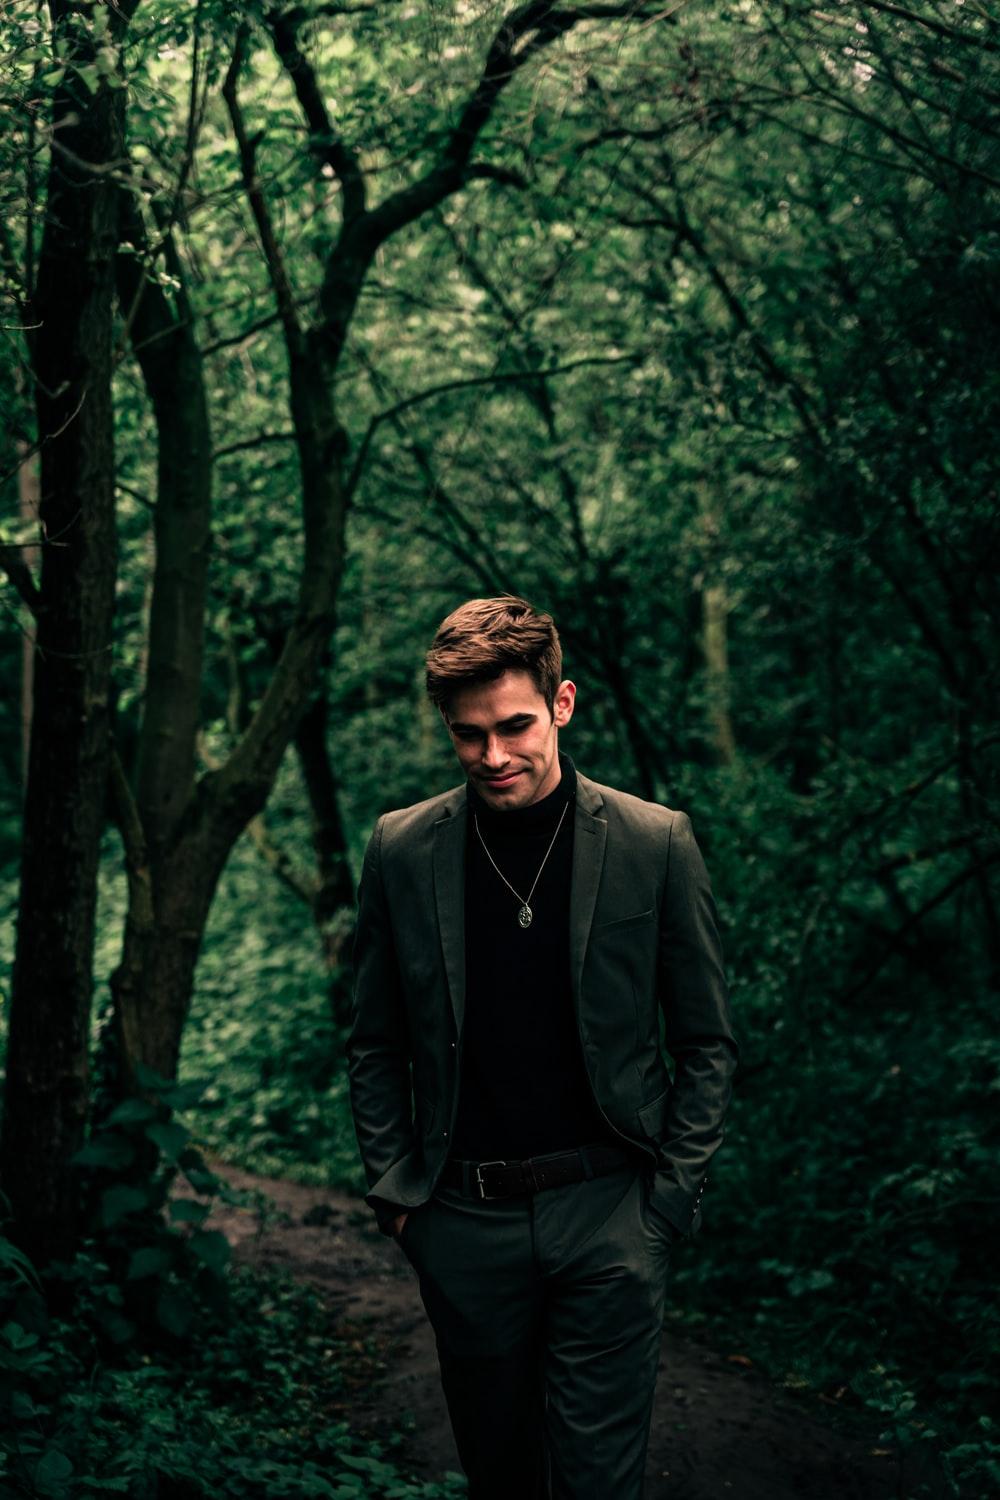 man in black suit jacket standing in forest during daytime